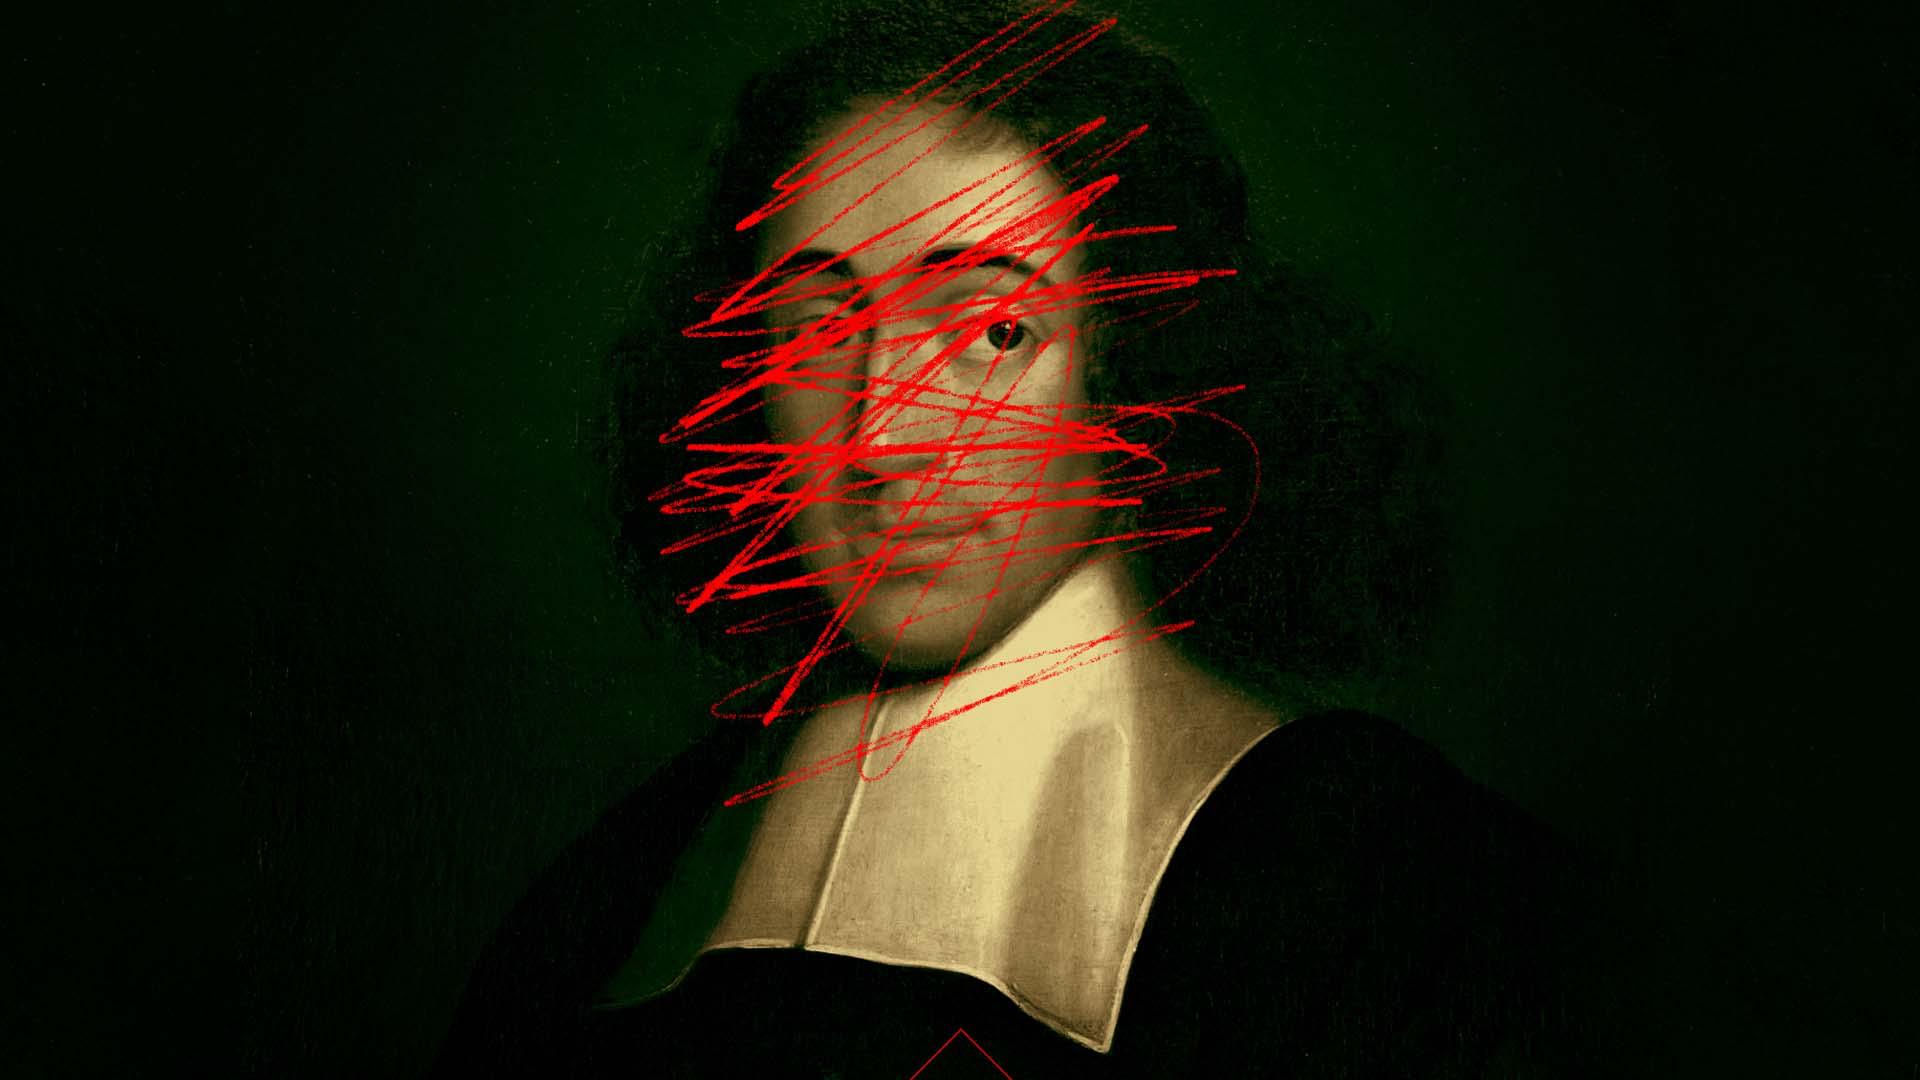 SPINOZA: 6 REASONS FOR THE EXCOMMUNICATION OF THE PHILOSOPHER